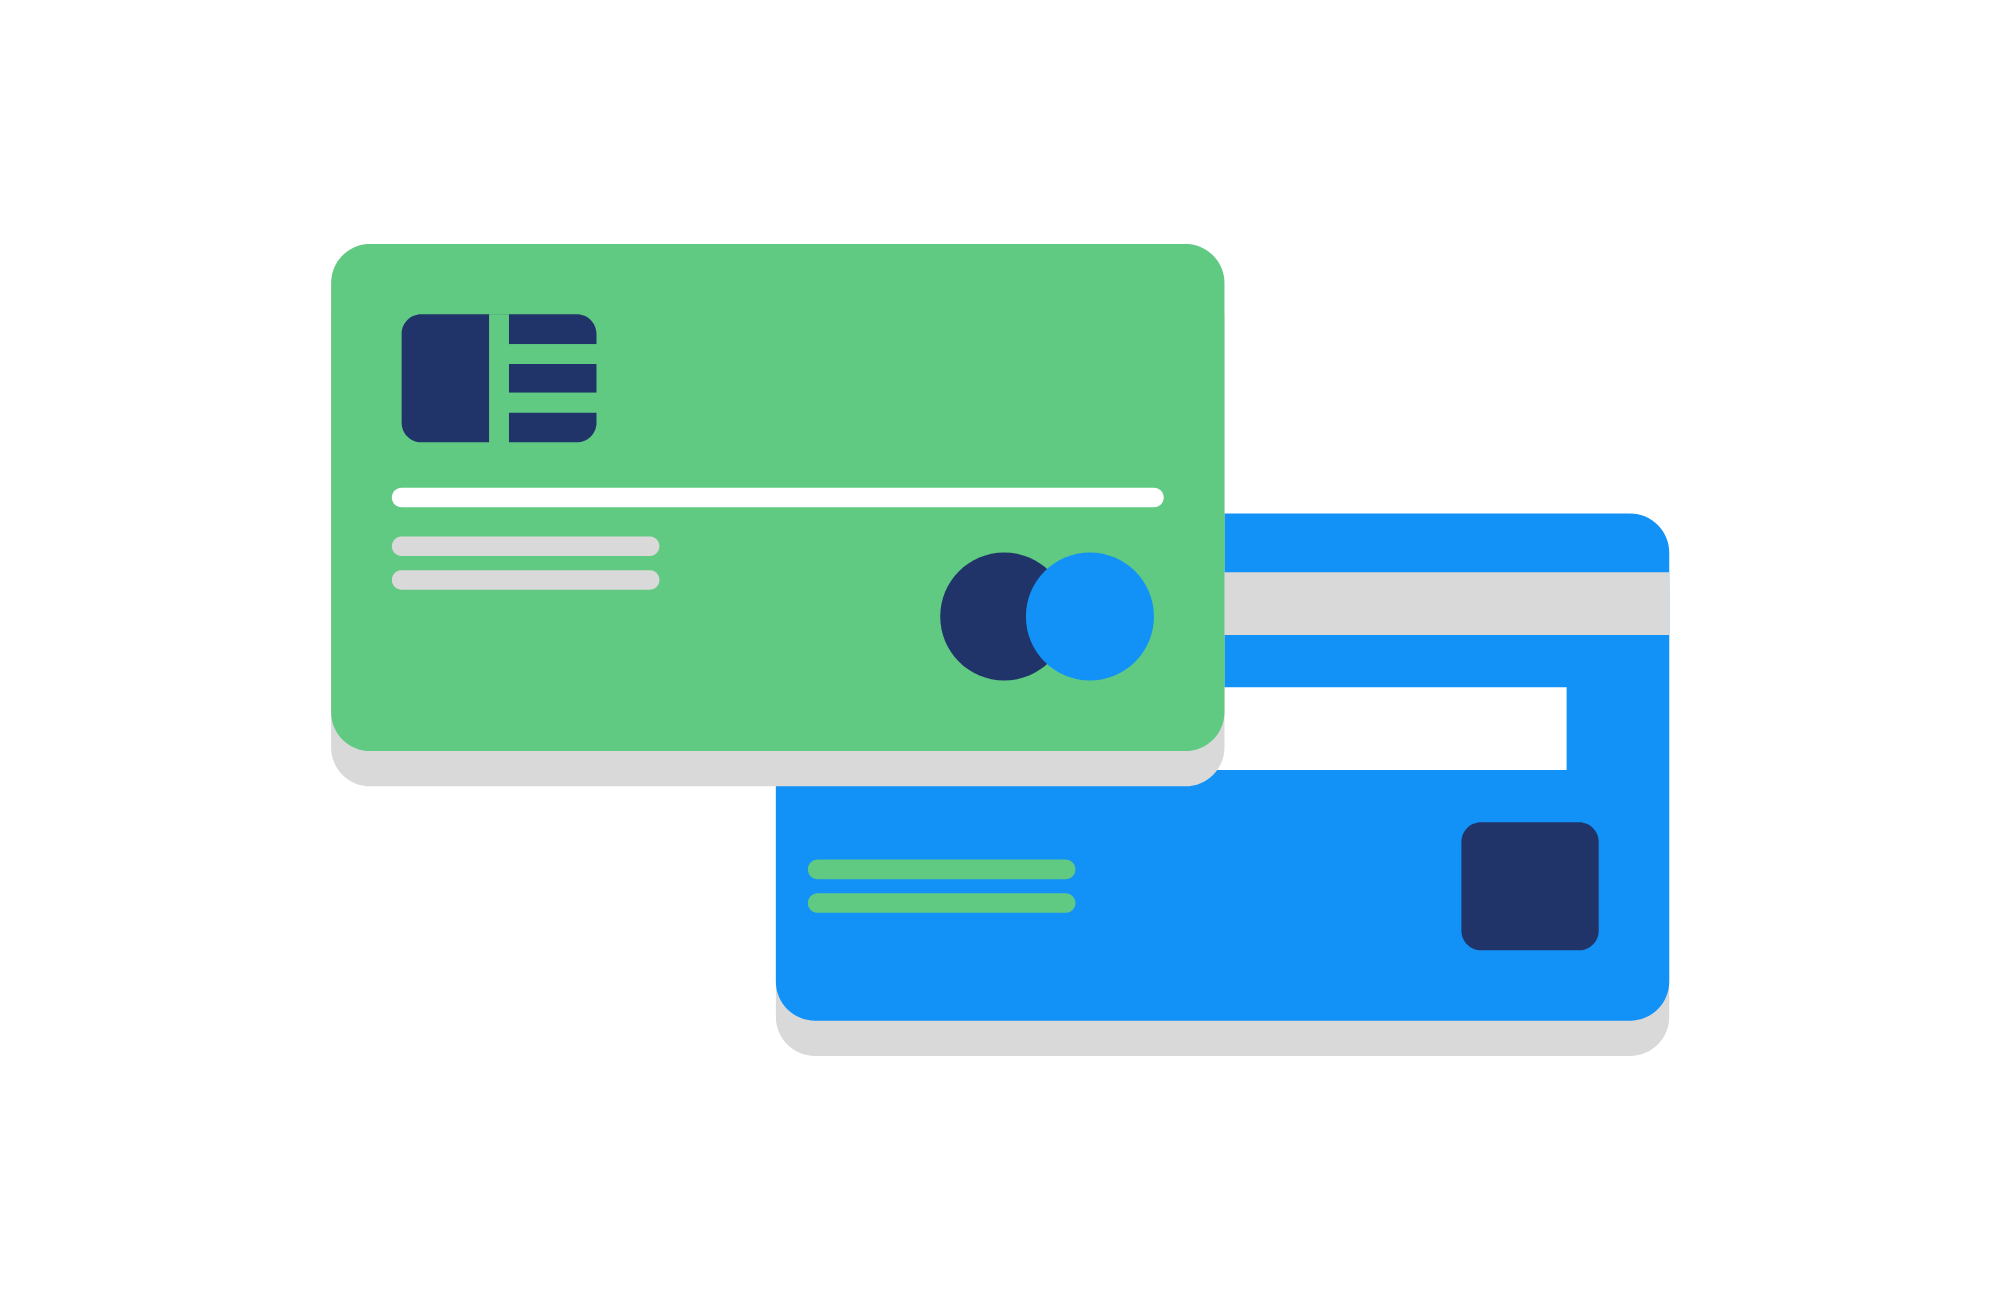 illustration of credit cards to show that accepting payments is important after selecting business insurance